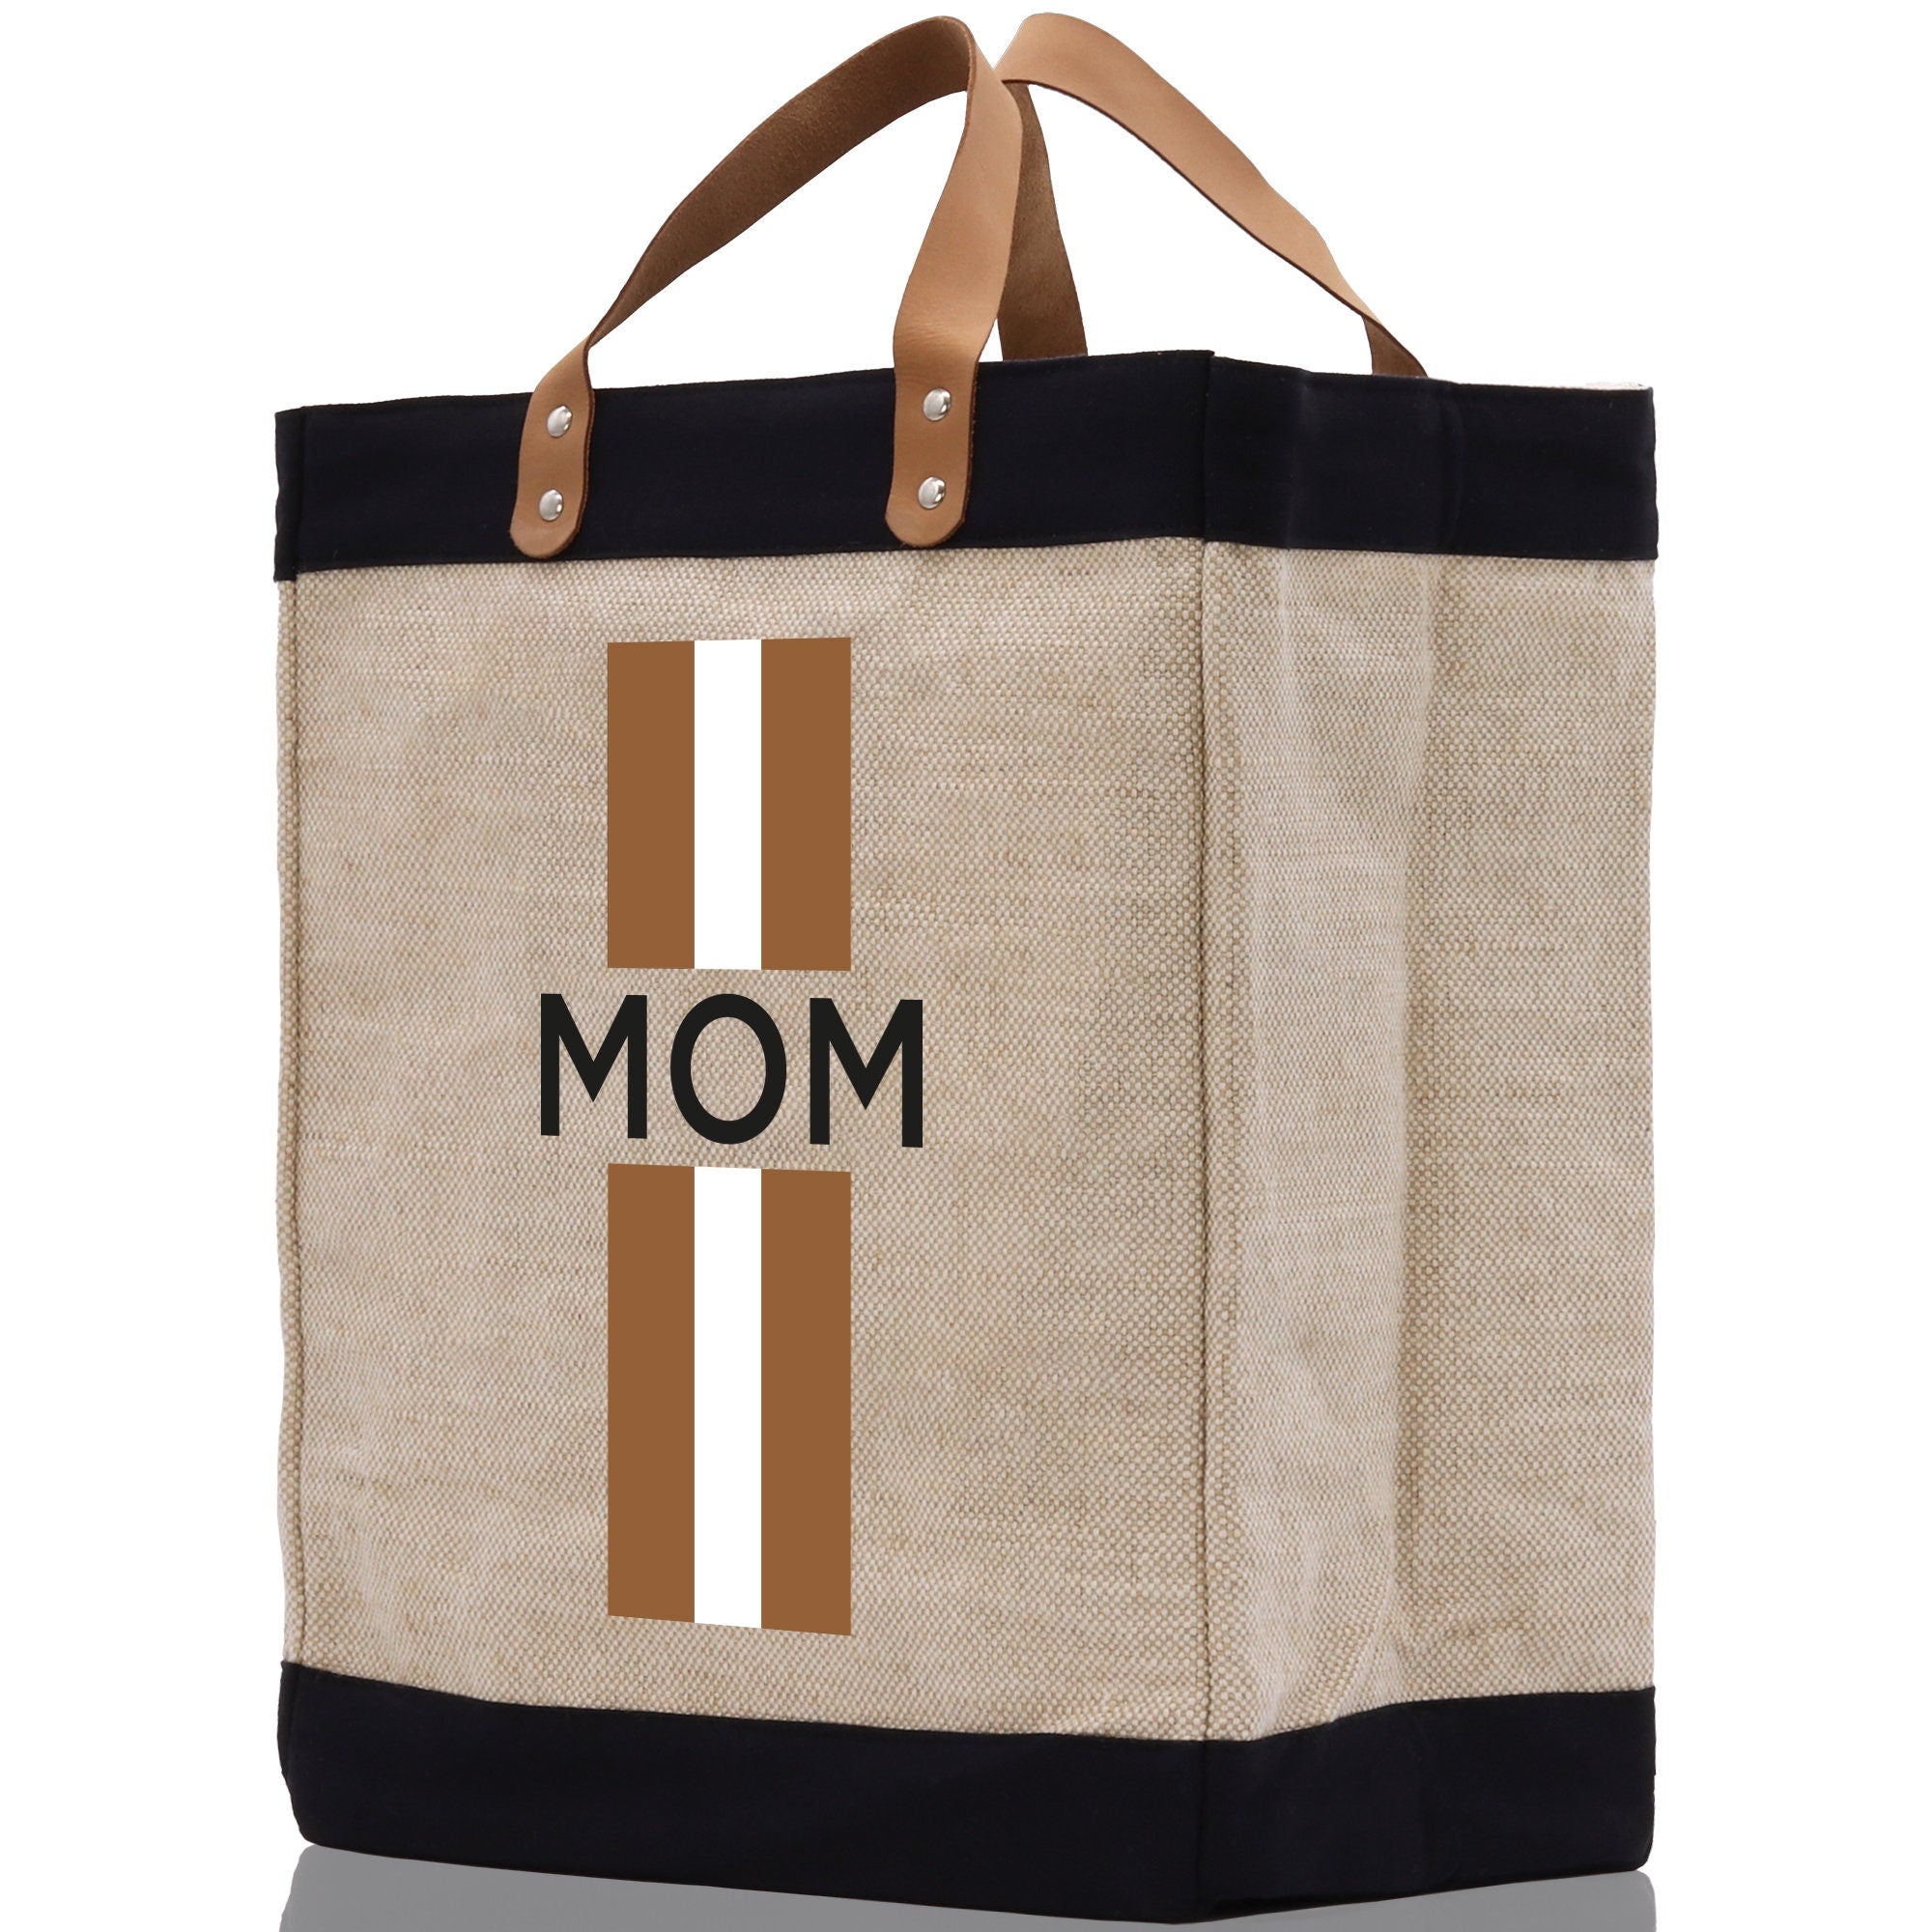 a jute bag with the word mom printed on it